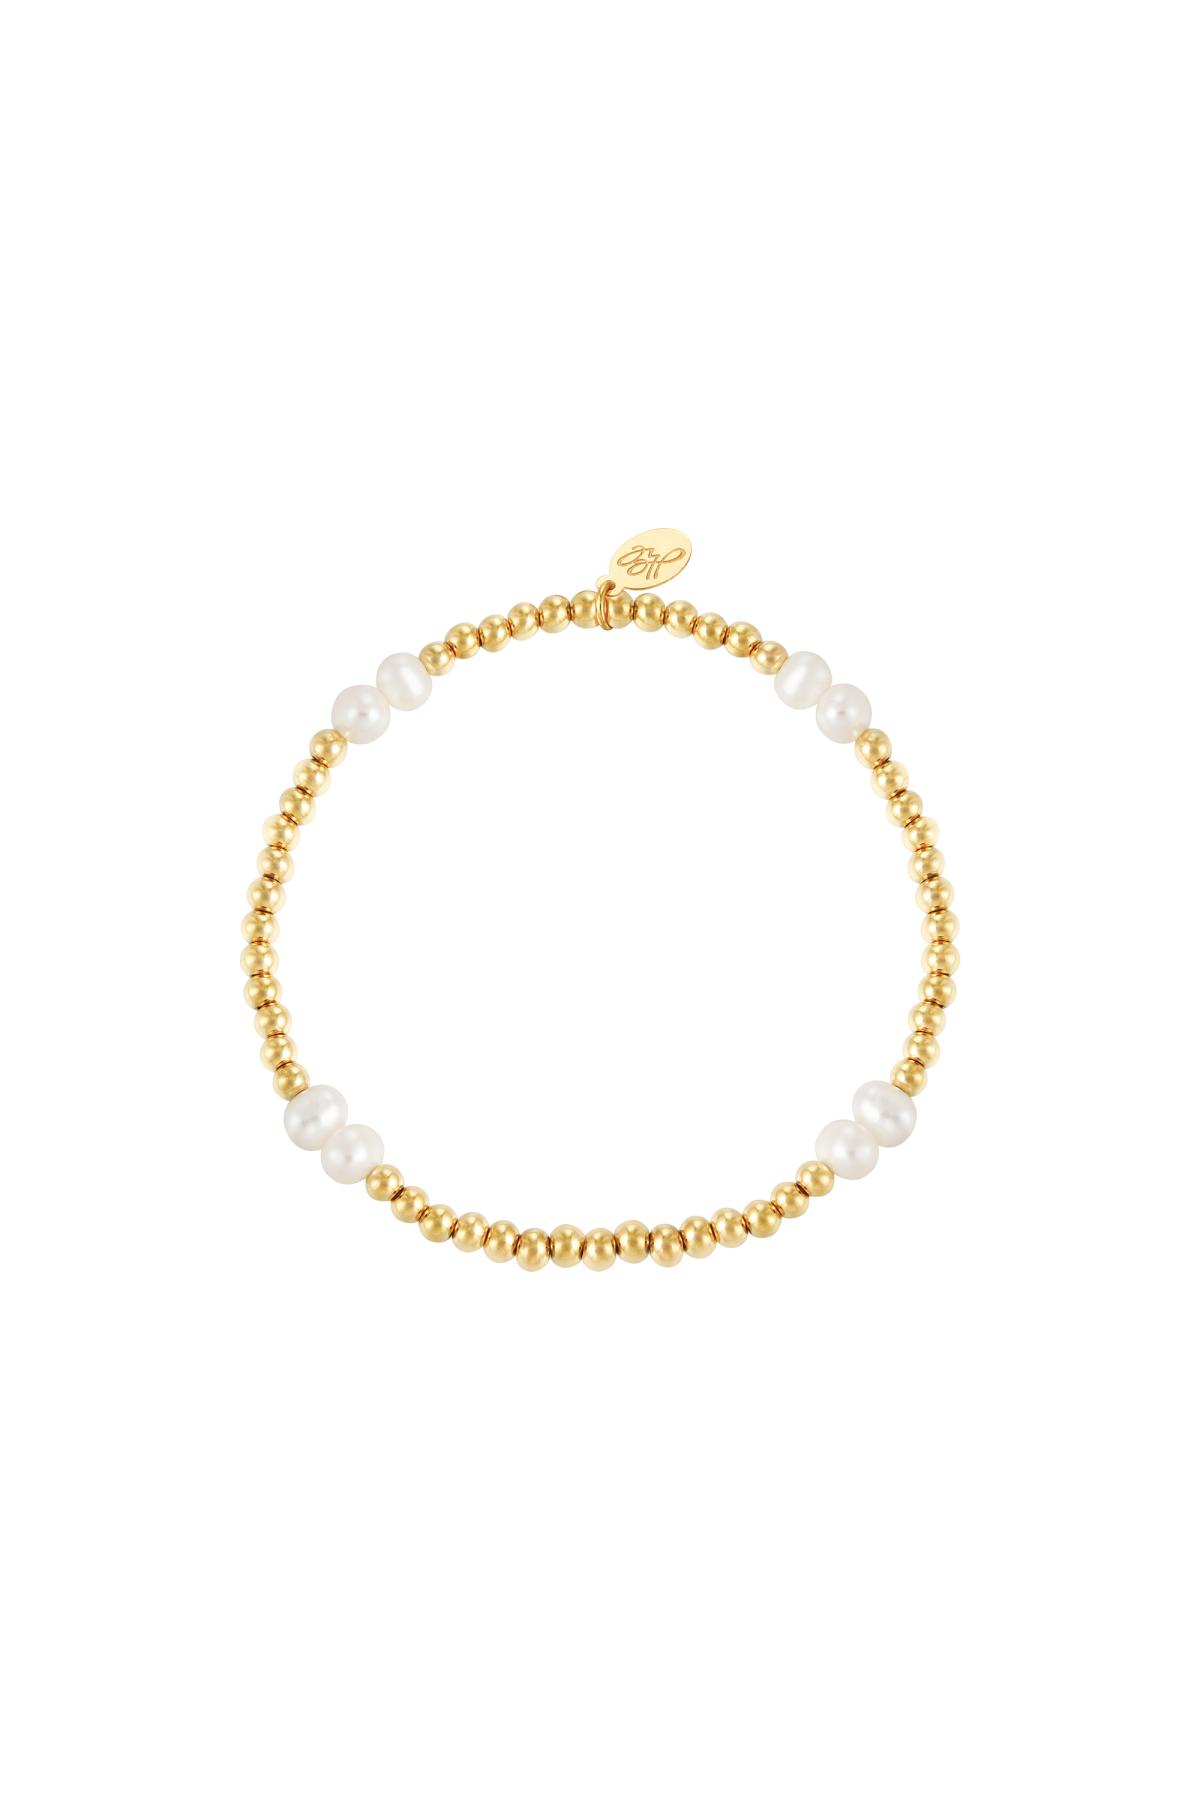 Bracelet pearl mix Gold Stainless Steel 